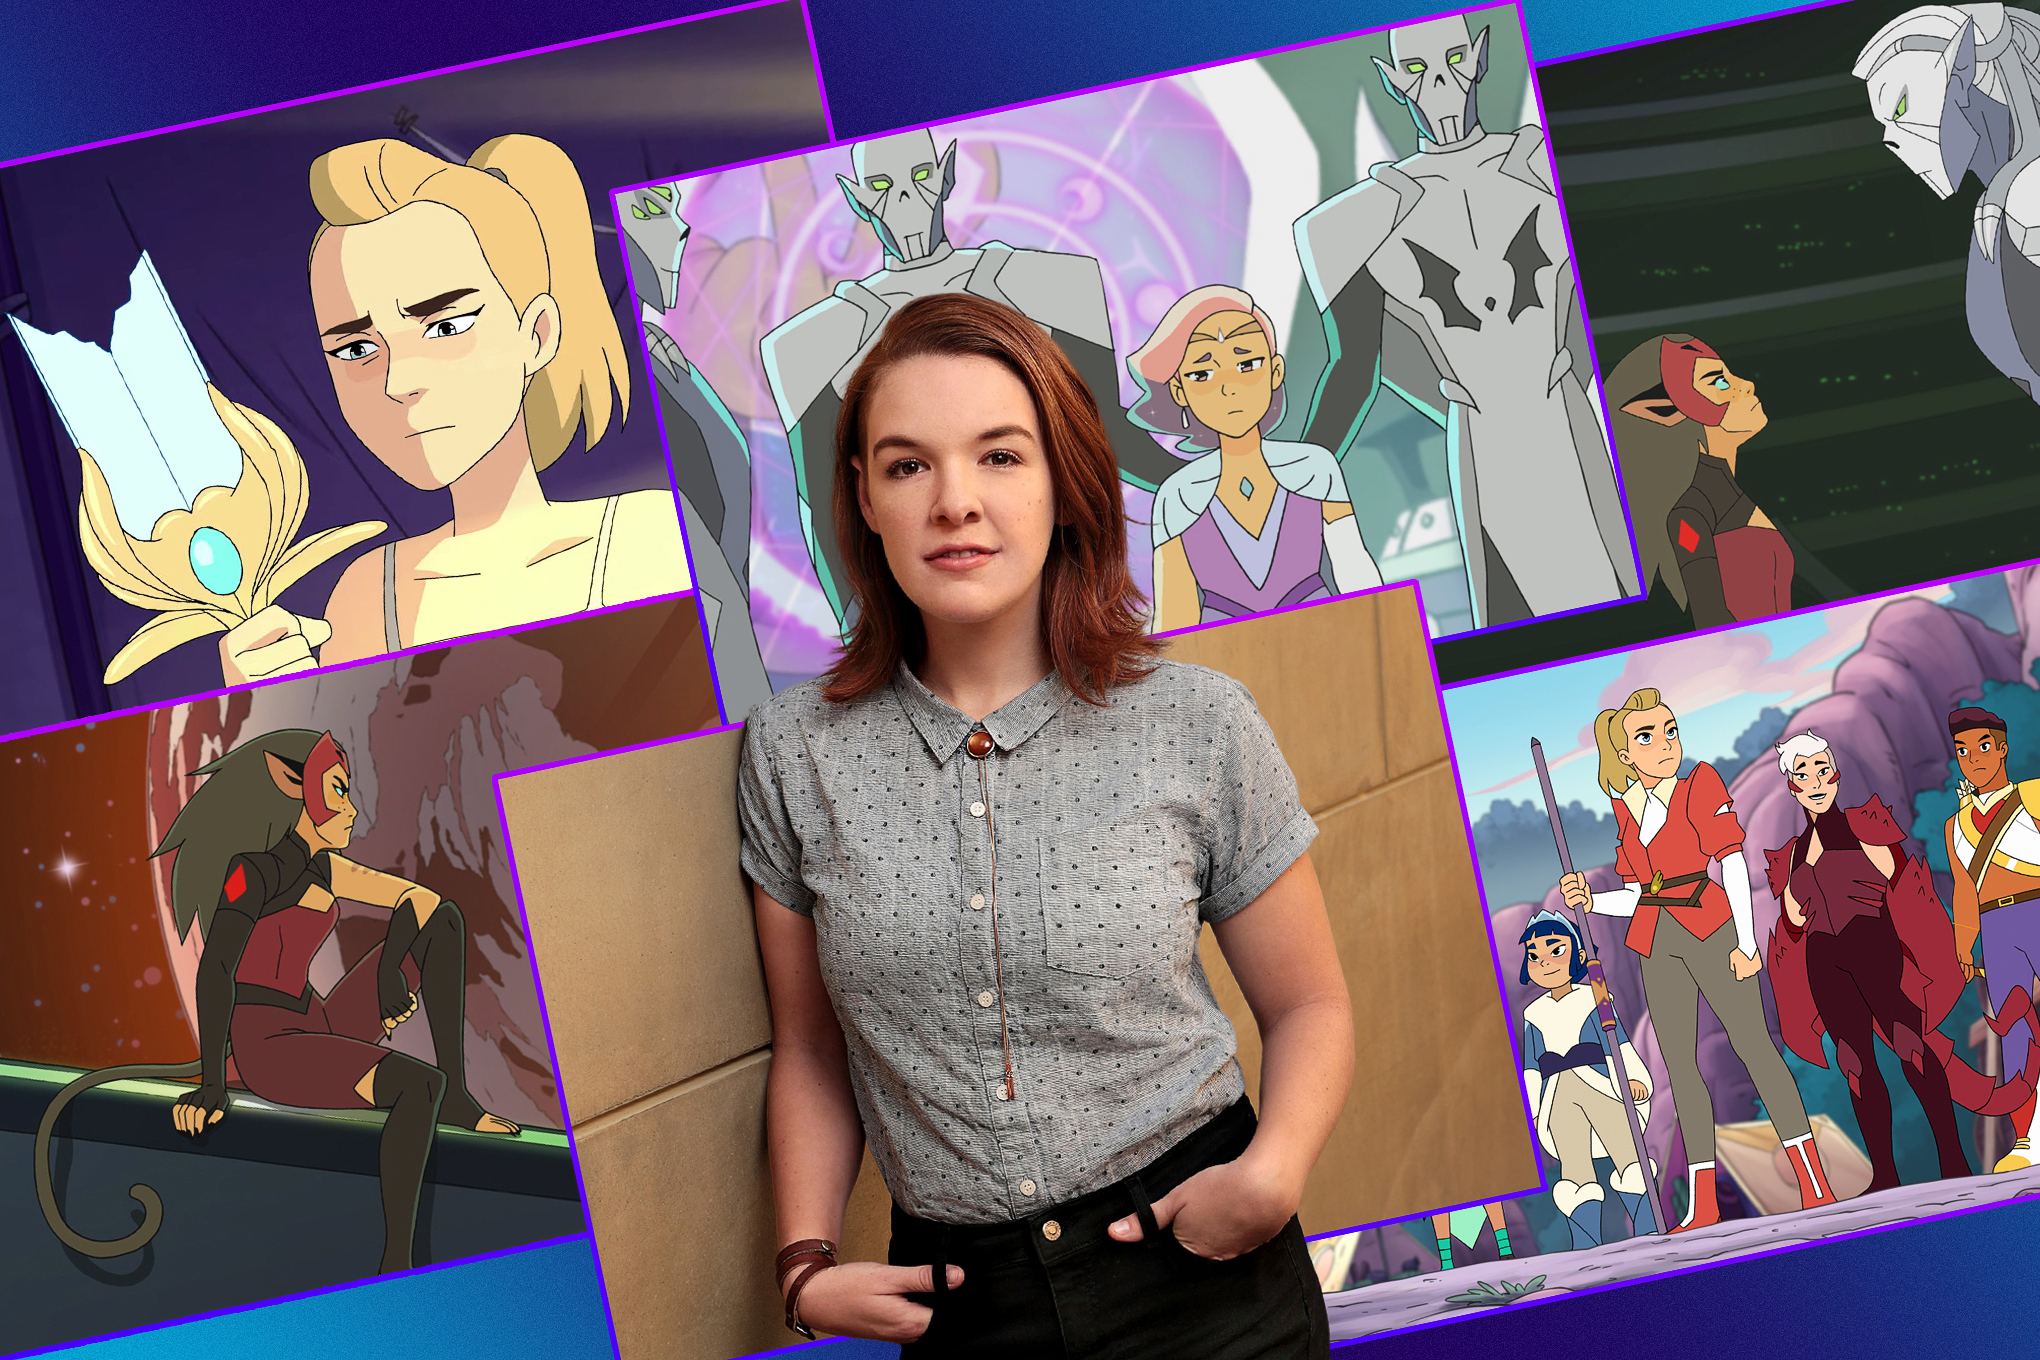 Grid with different images from the She-Ra animated series and a portrait of Noelle Stevenson in the center